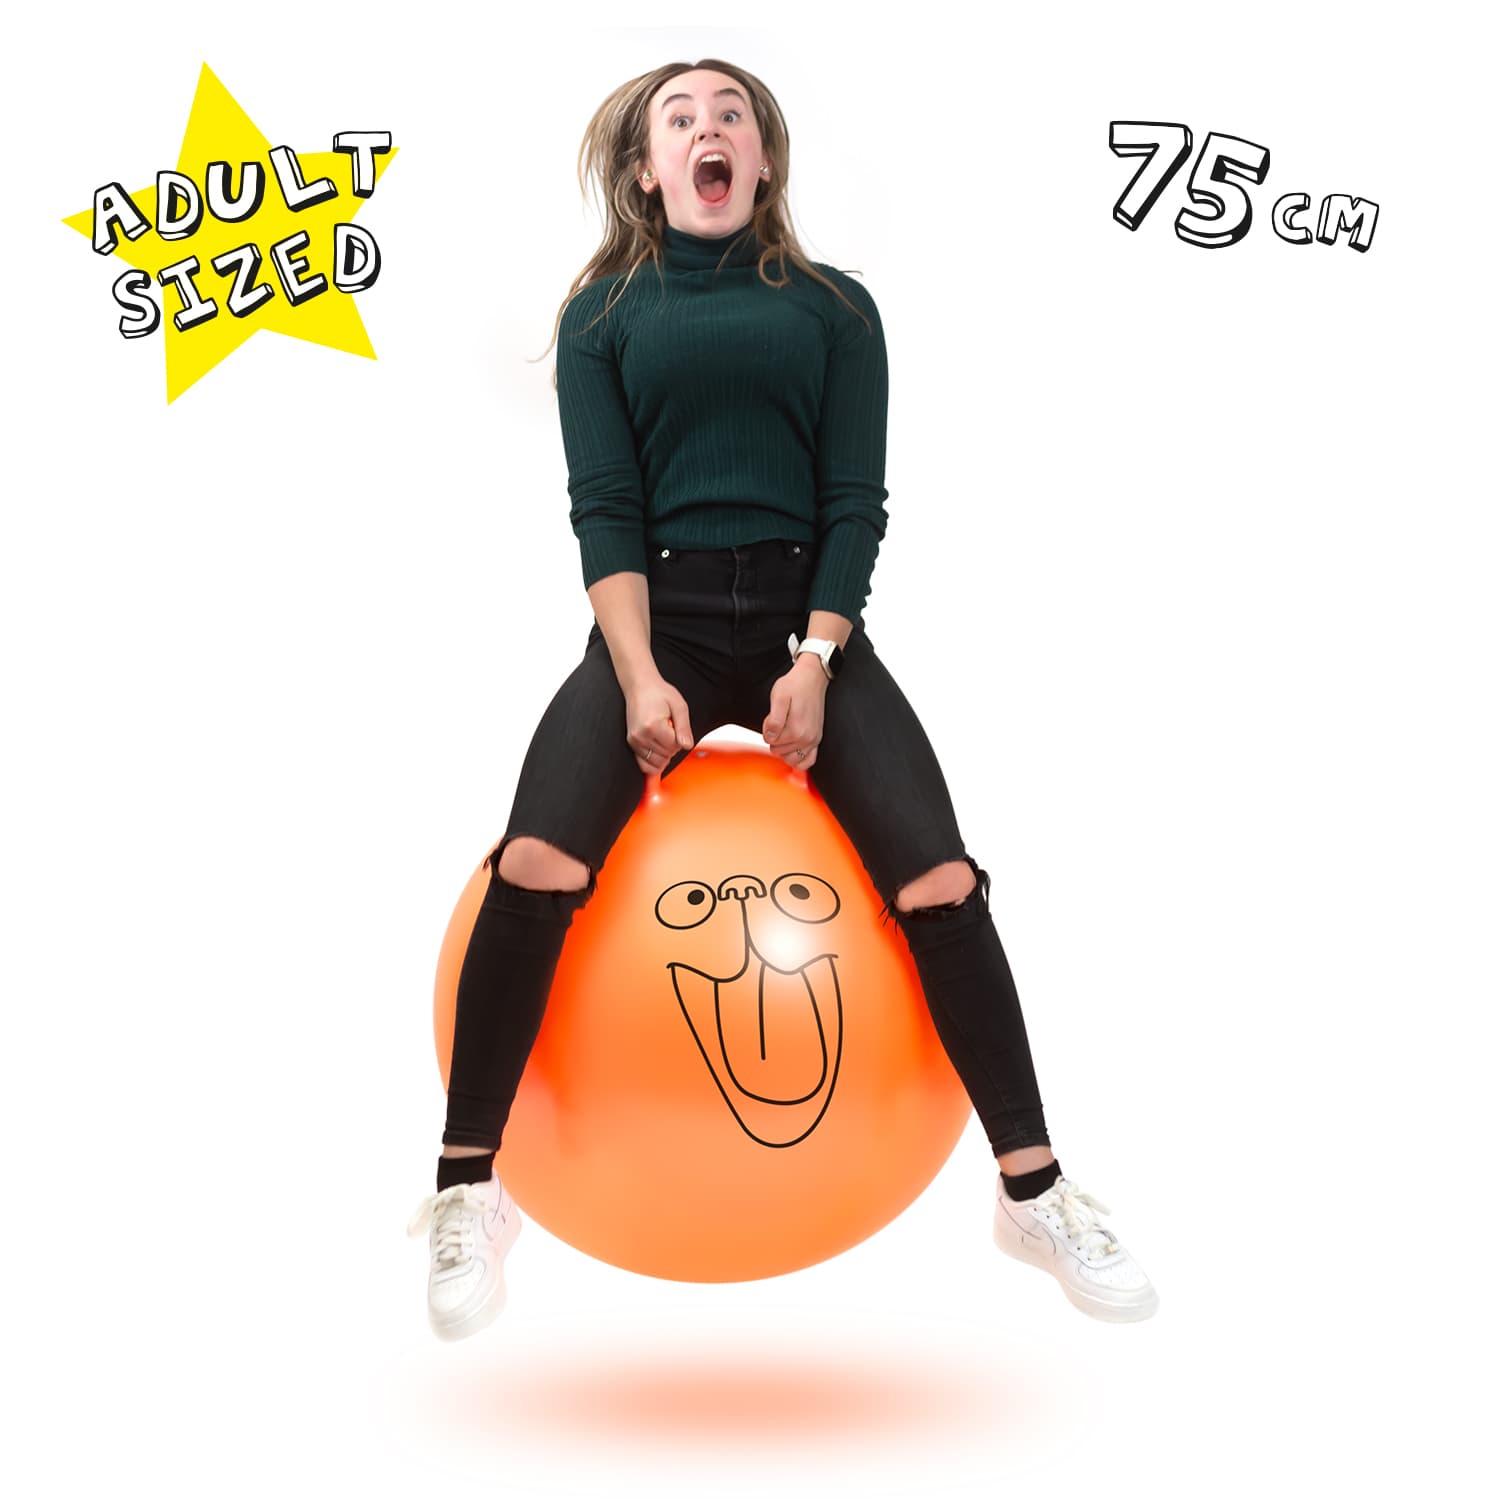 Giant Adult Space Hopper (75cm) Inflatable Retro Moon Ball